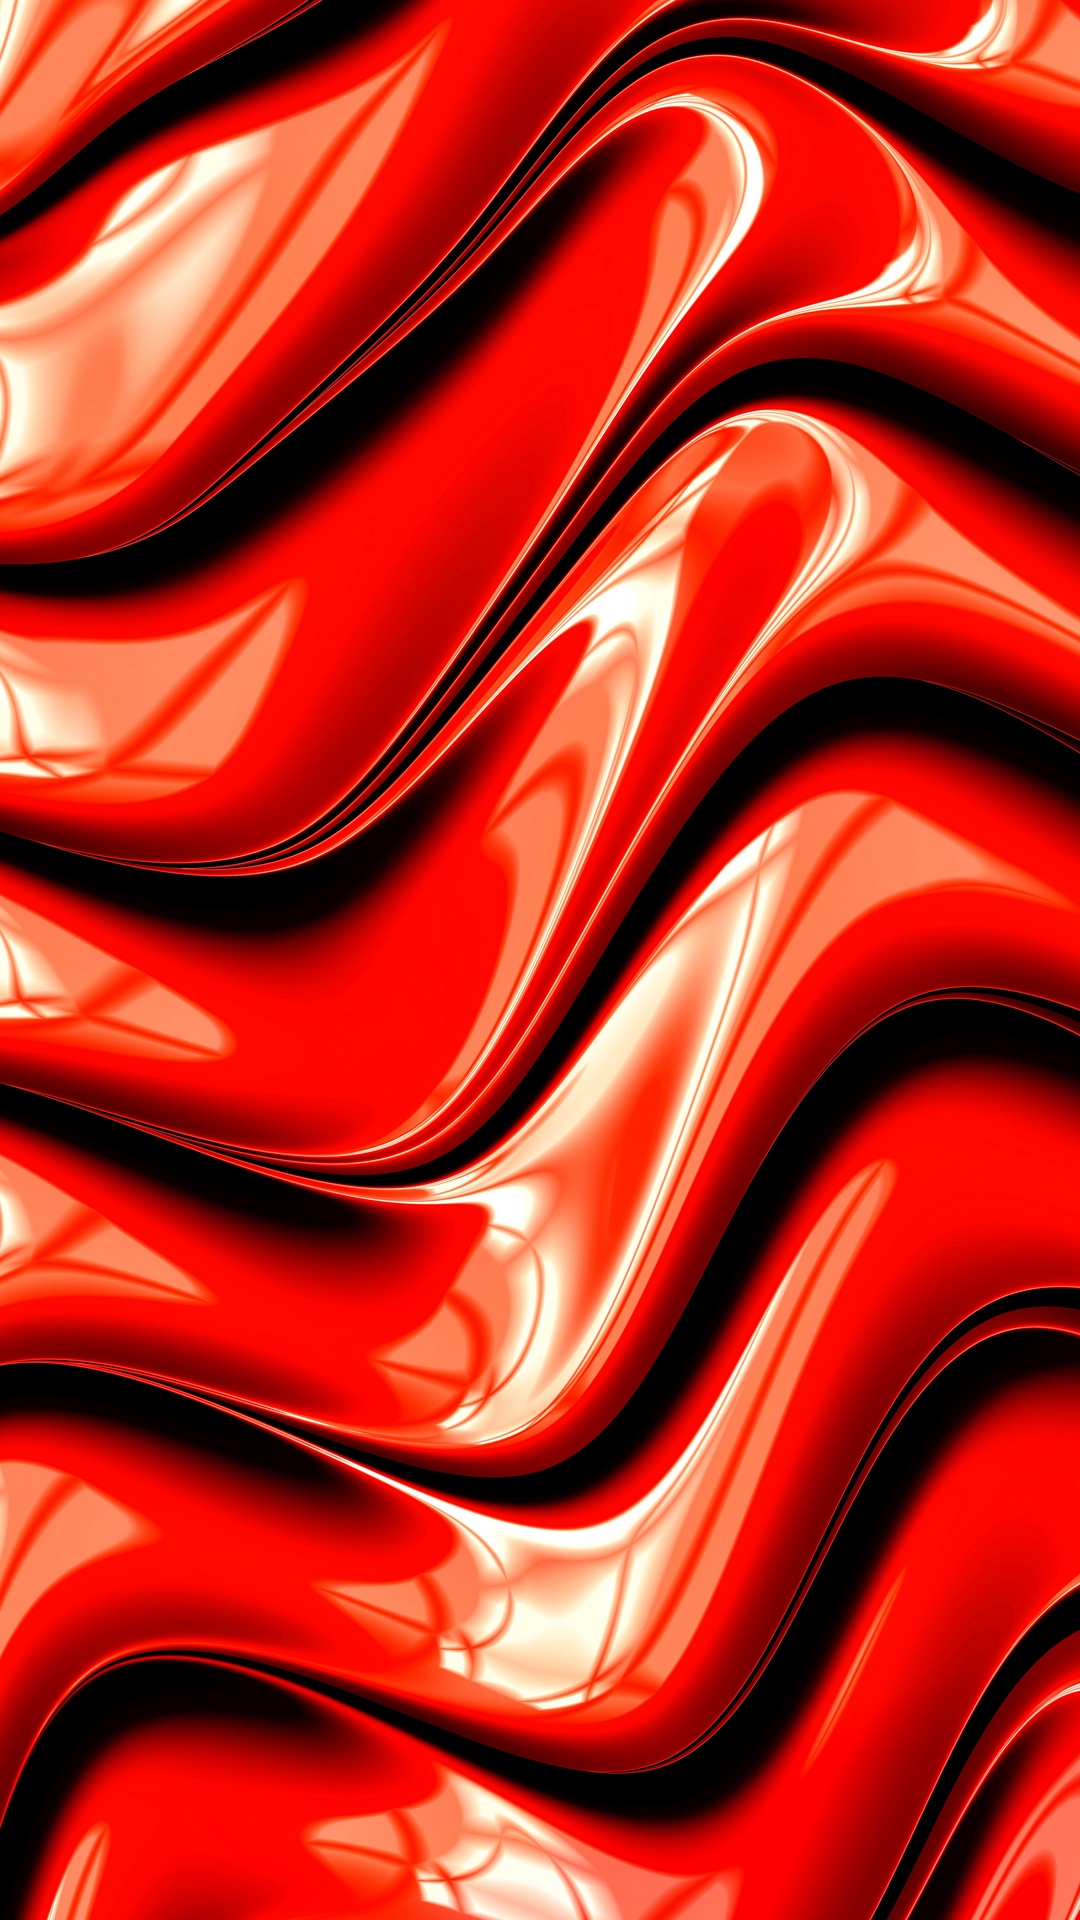 3D Fractal Graphic Red  Surface HD Wallpaper  1080x1920